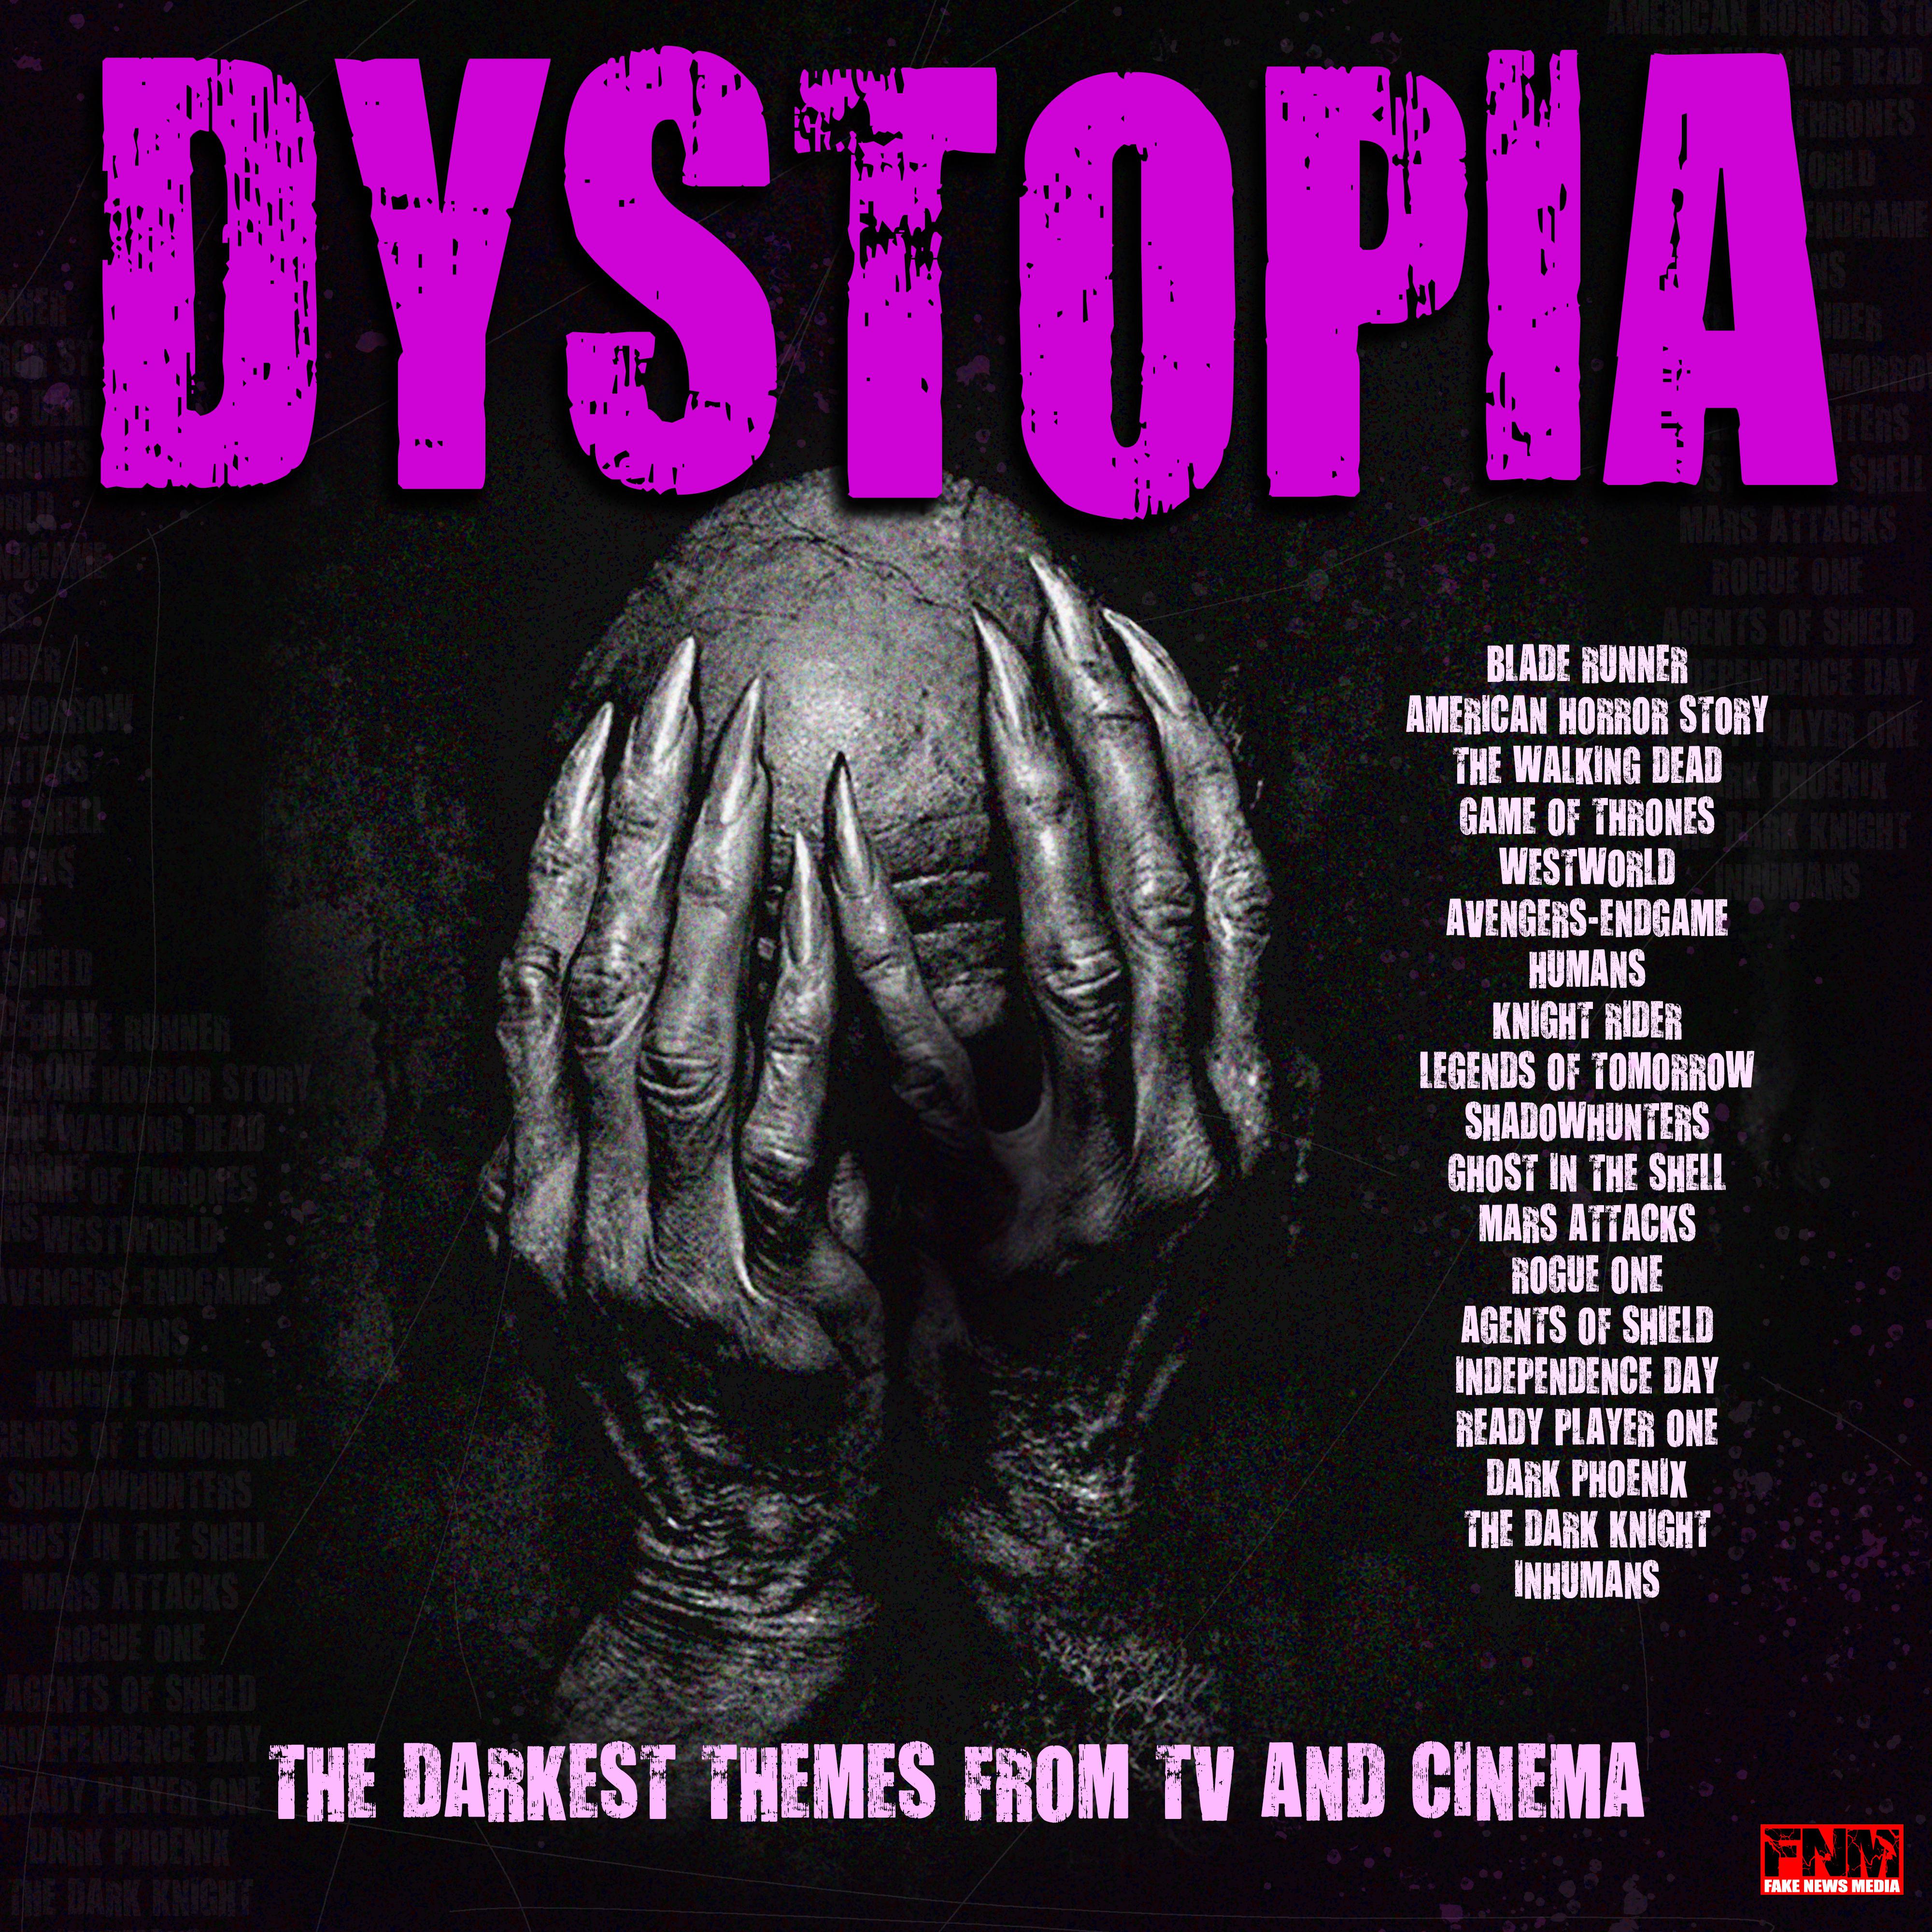 Dystopia - The Darkest Themes From TV and Cinema